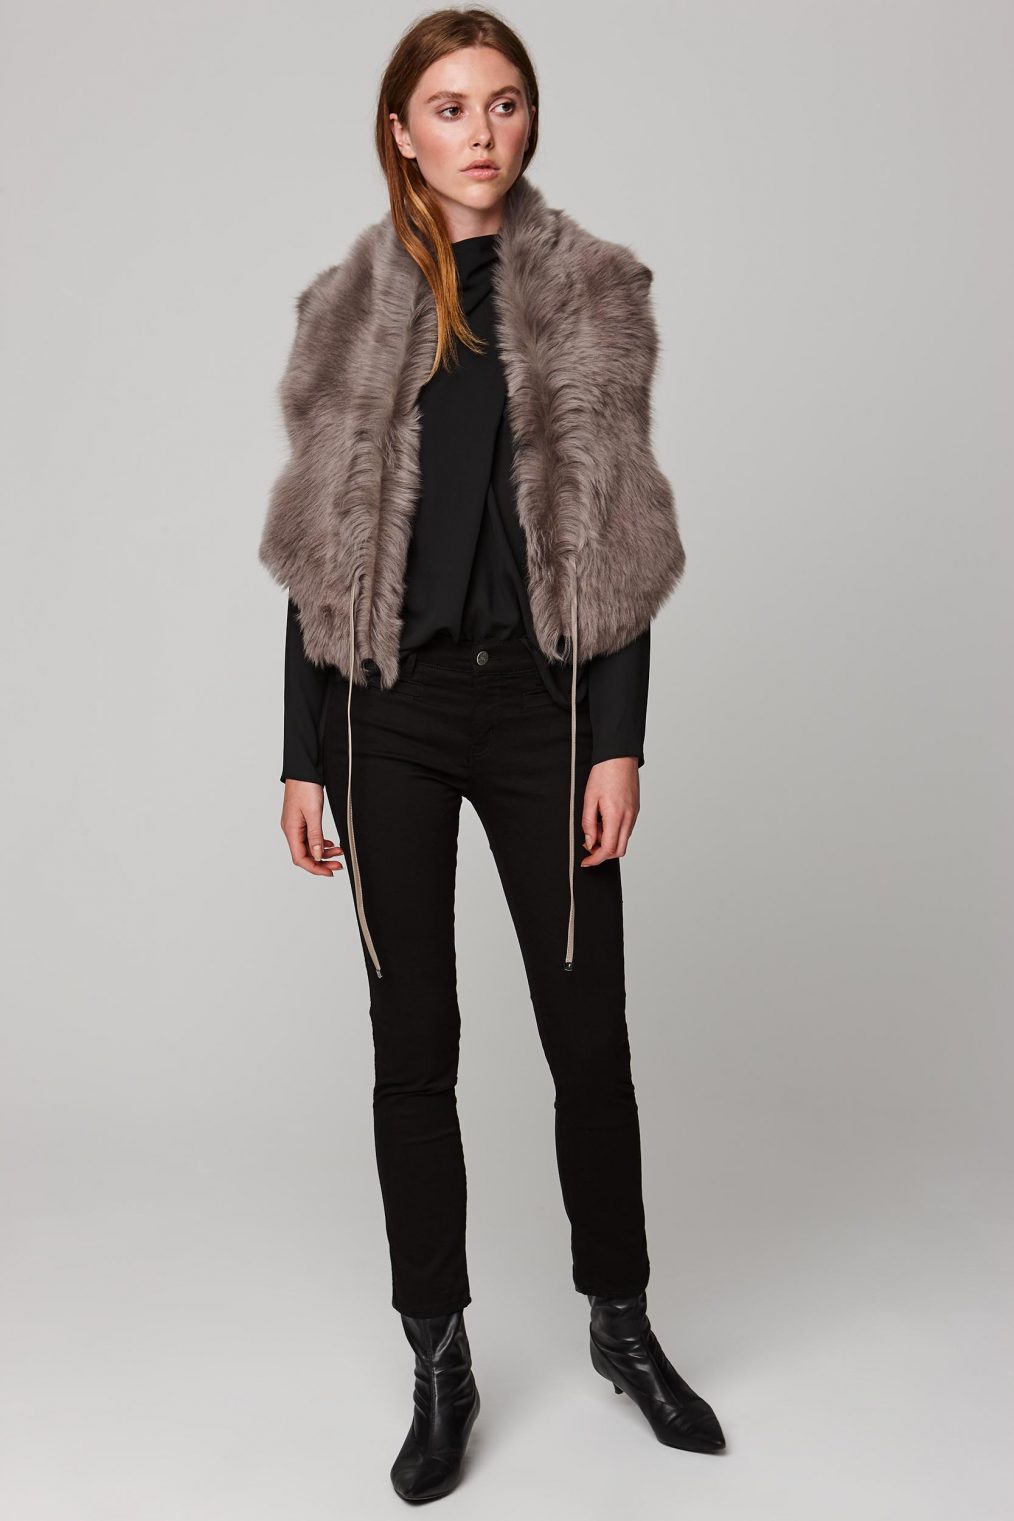 Shearling Shawl Scarf in Taupe | Women | Gushlow & Cole